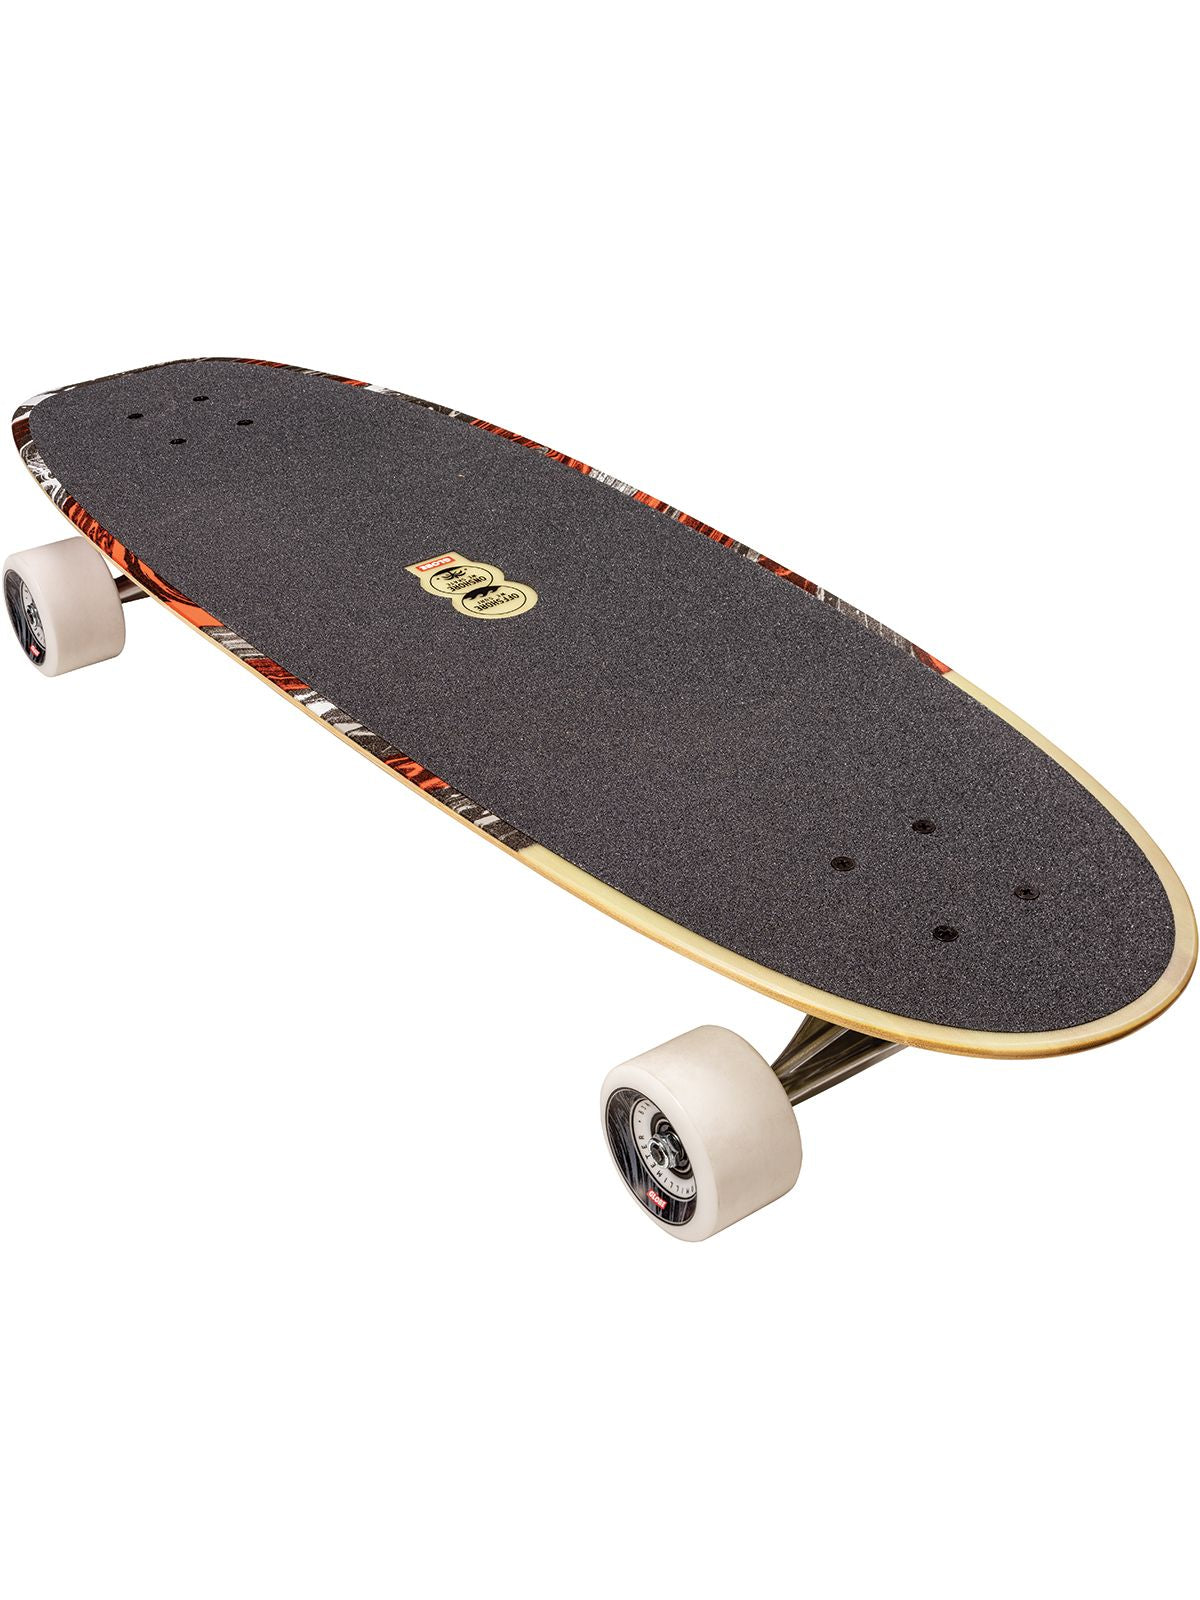 Surfskate Costa 31" On-Shore/Low Tide Globe Europe